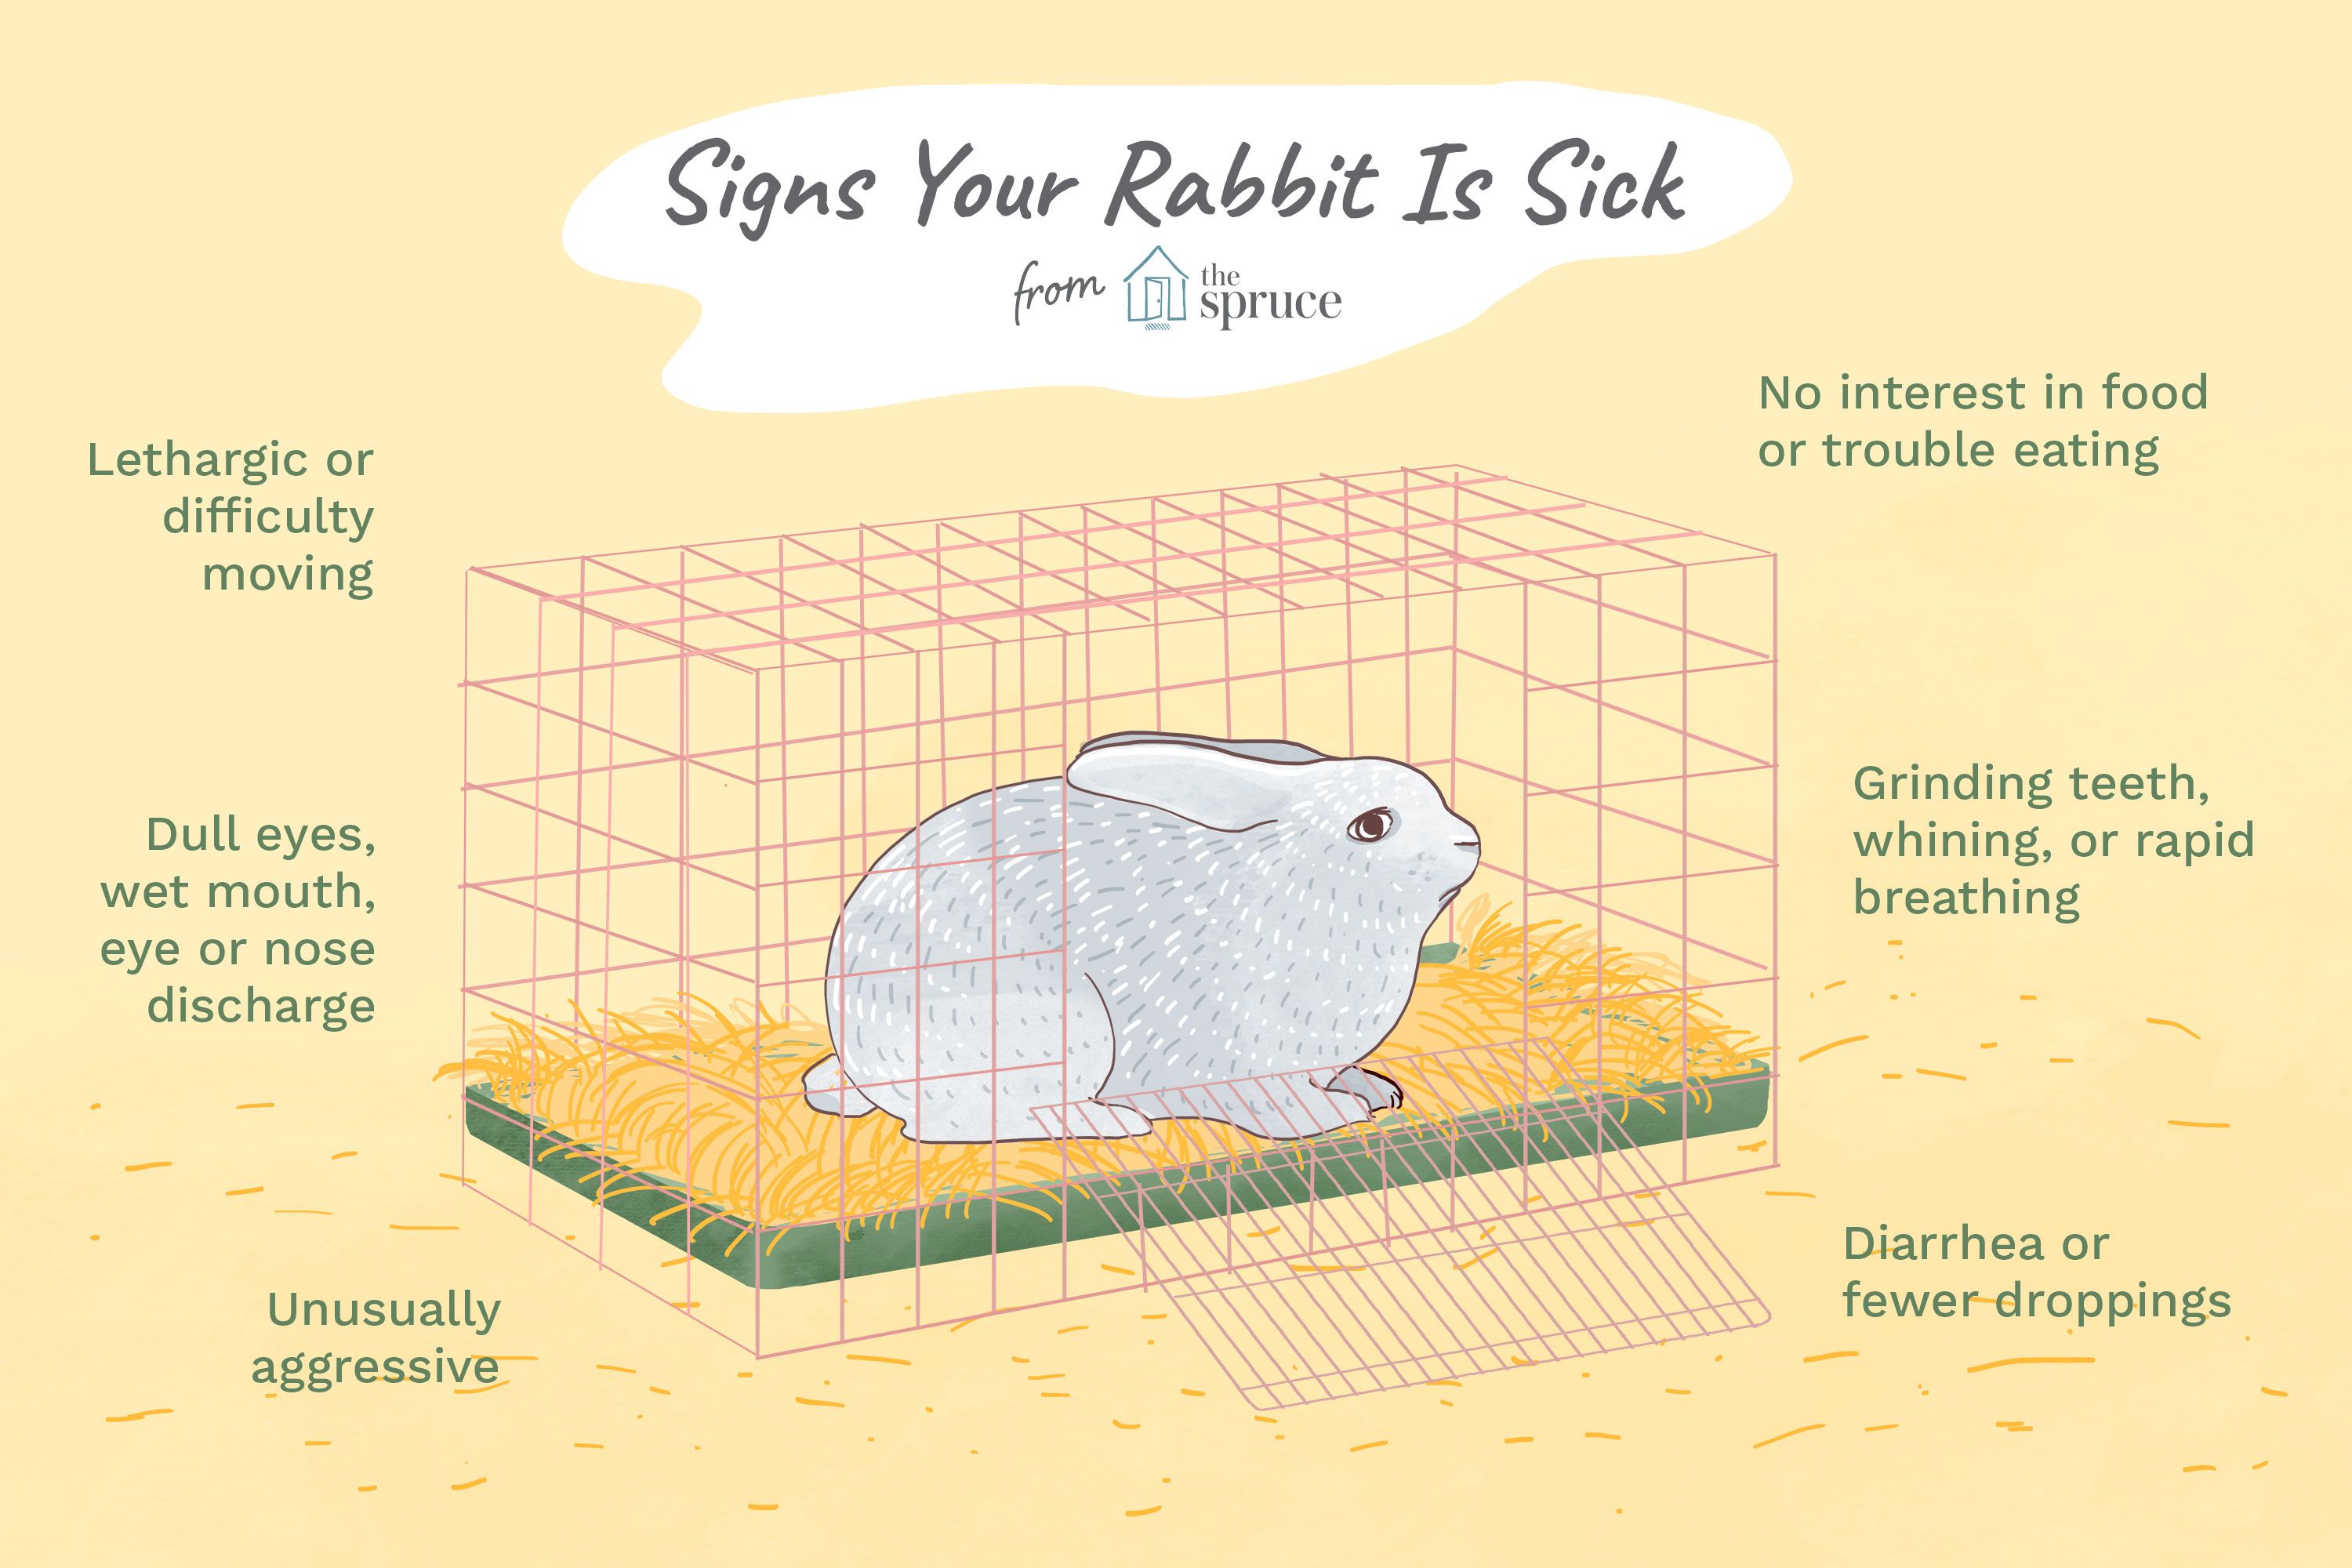 What Should I Do If My Baby Rabbit Gets Sick?